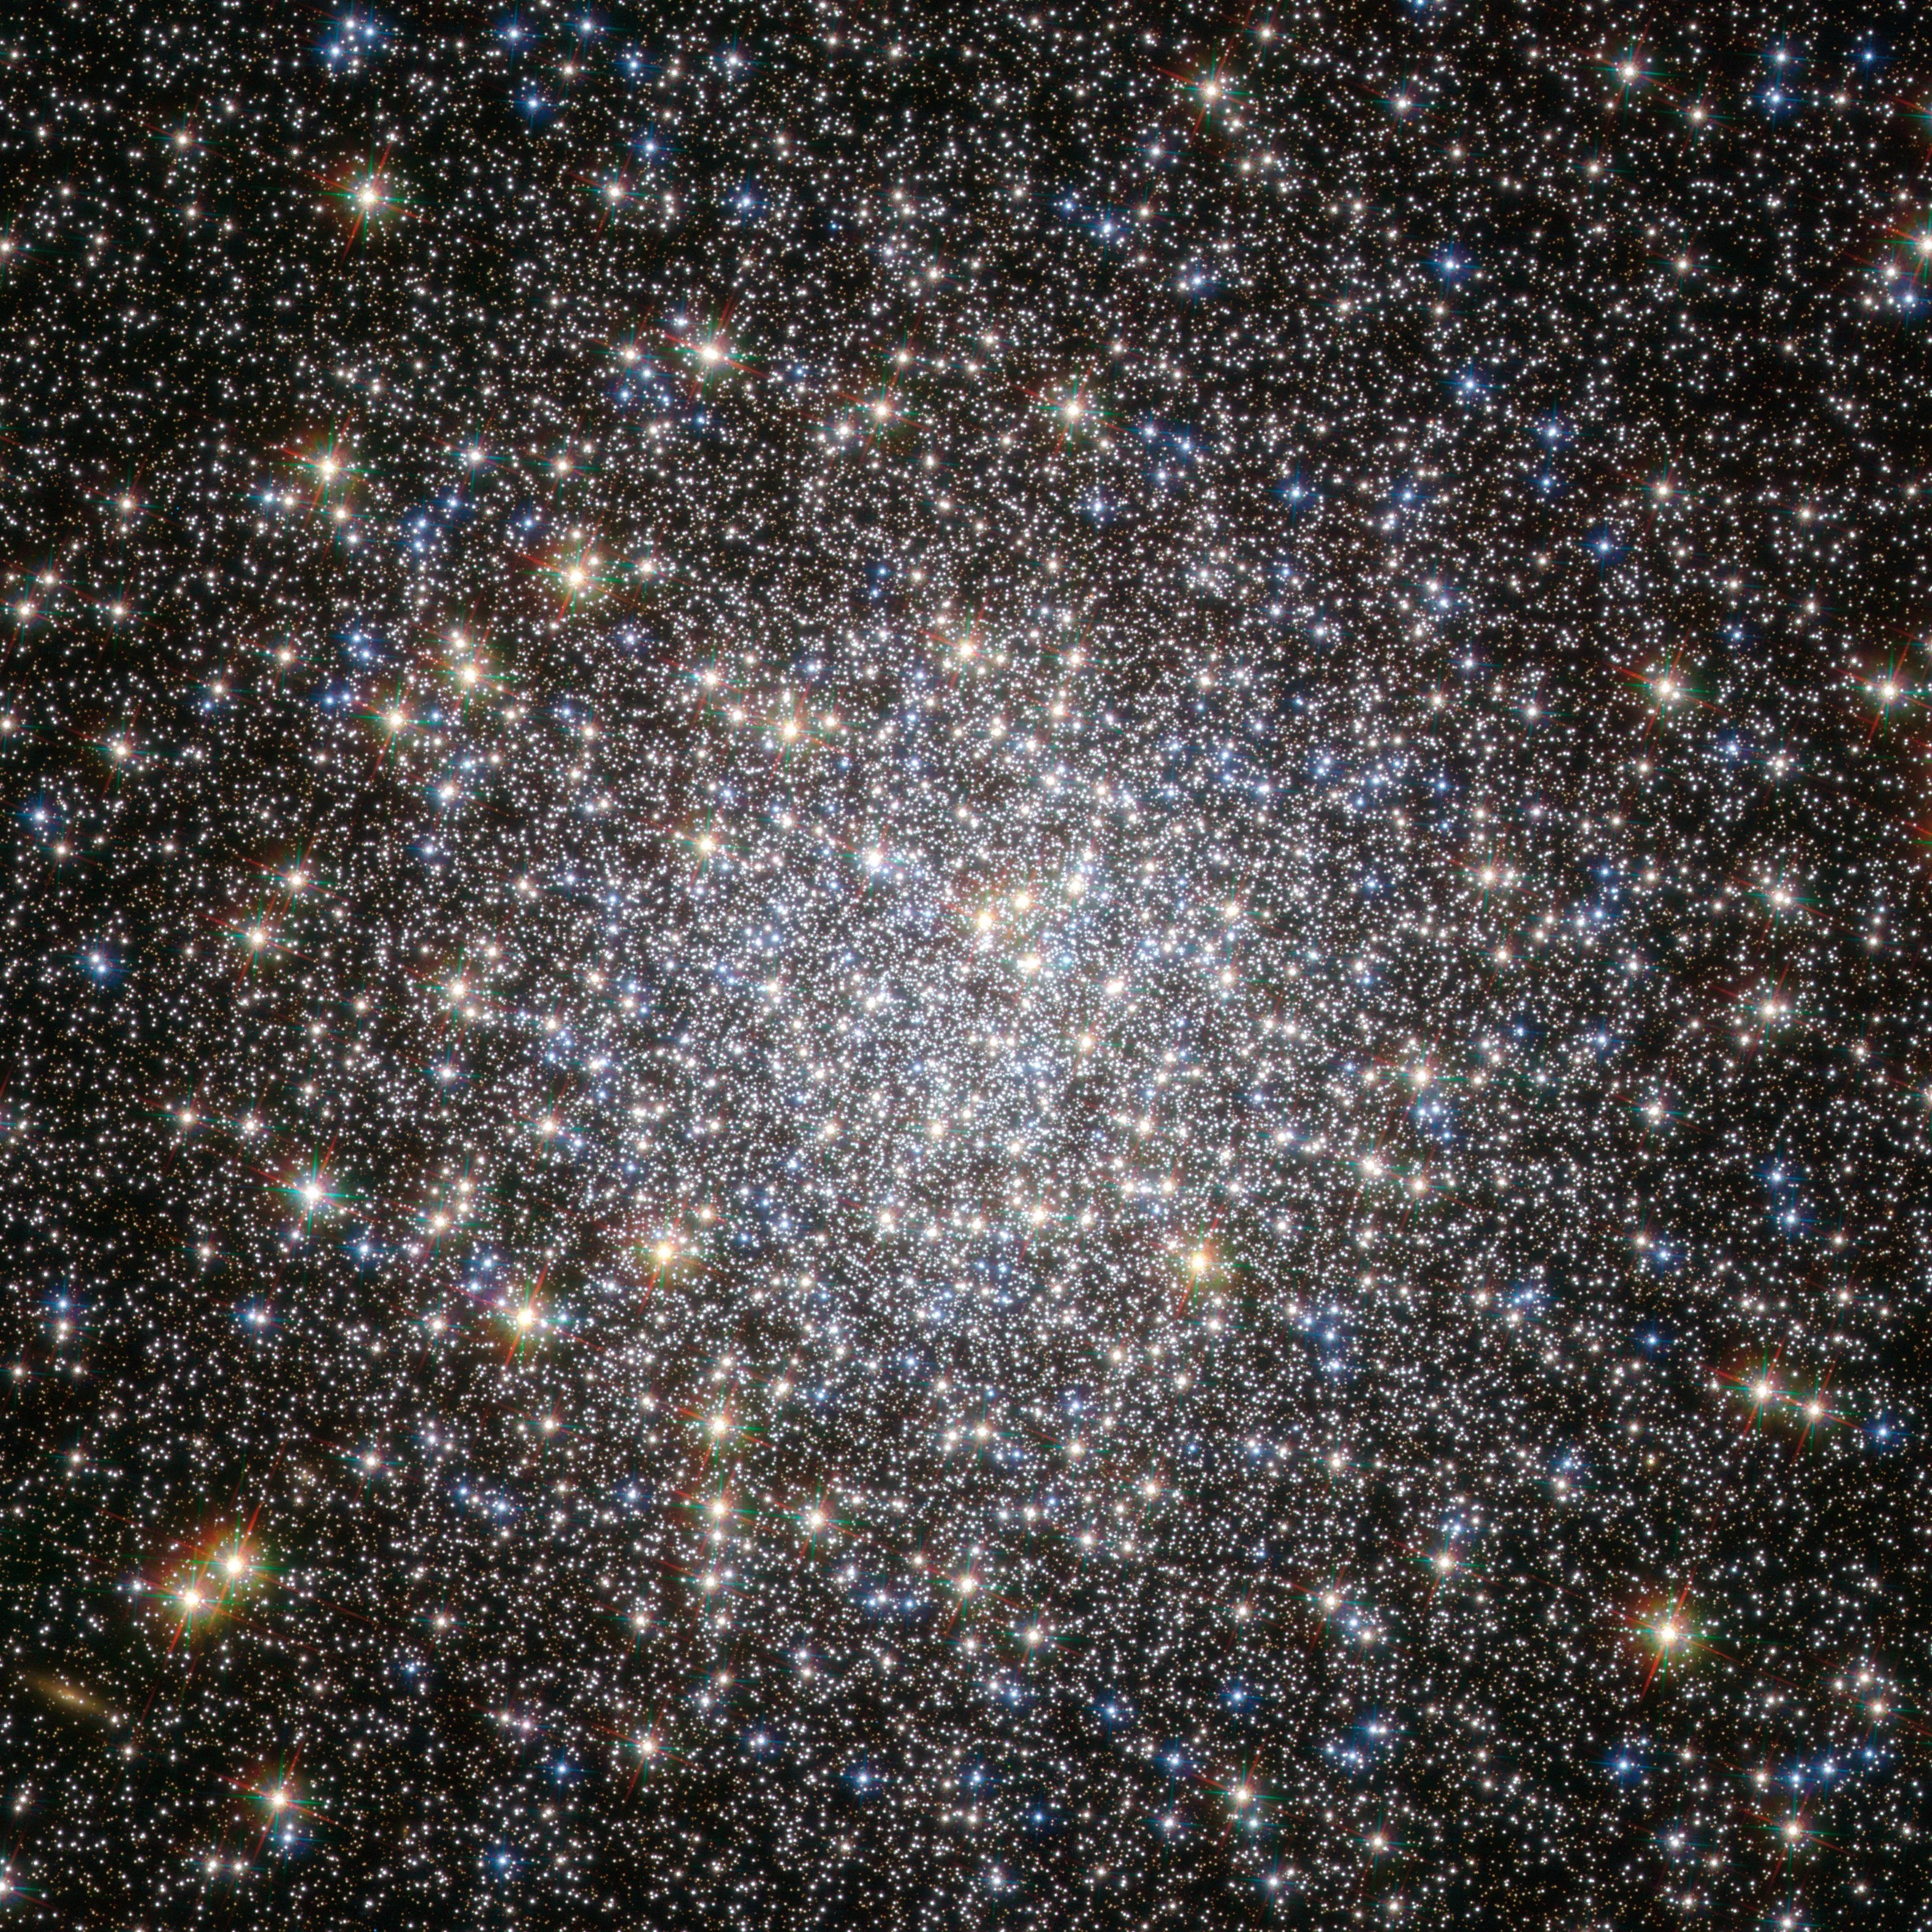 Hubble view of M5, a collection of thousands of stars of different colors.